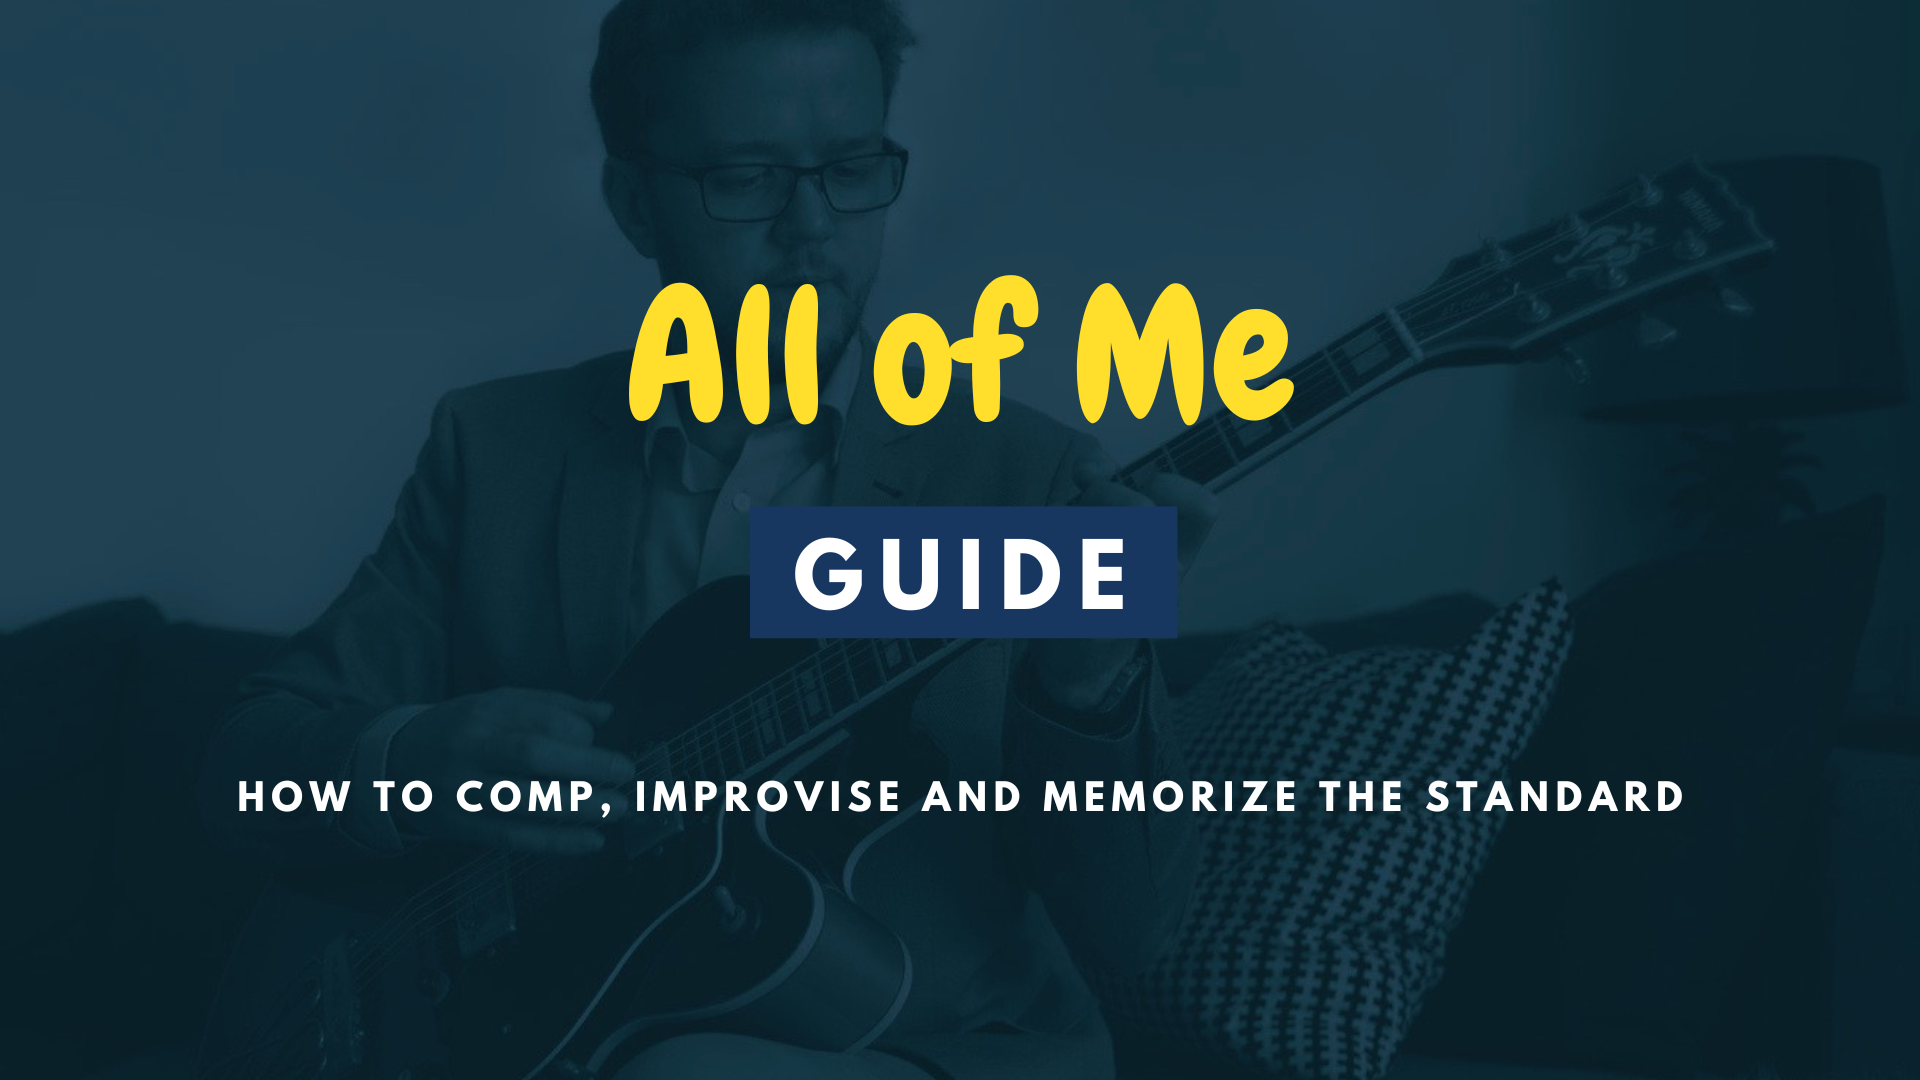 All of Me Guide